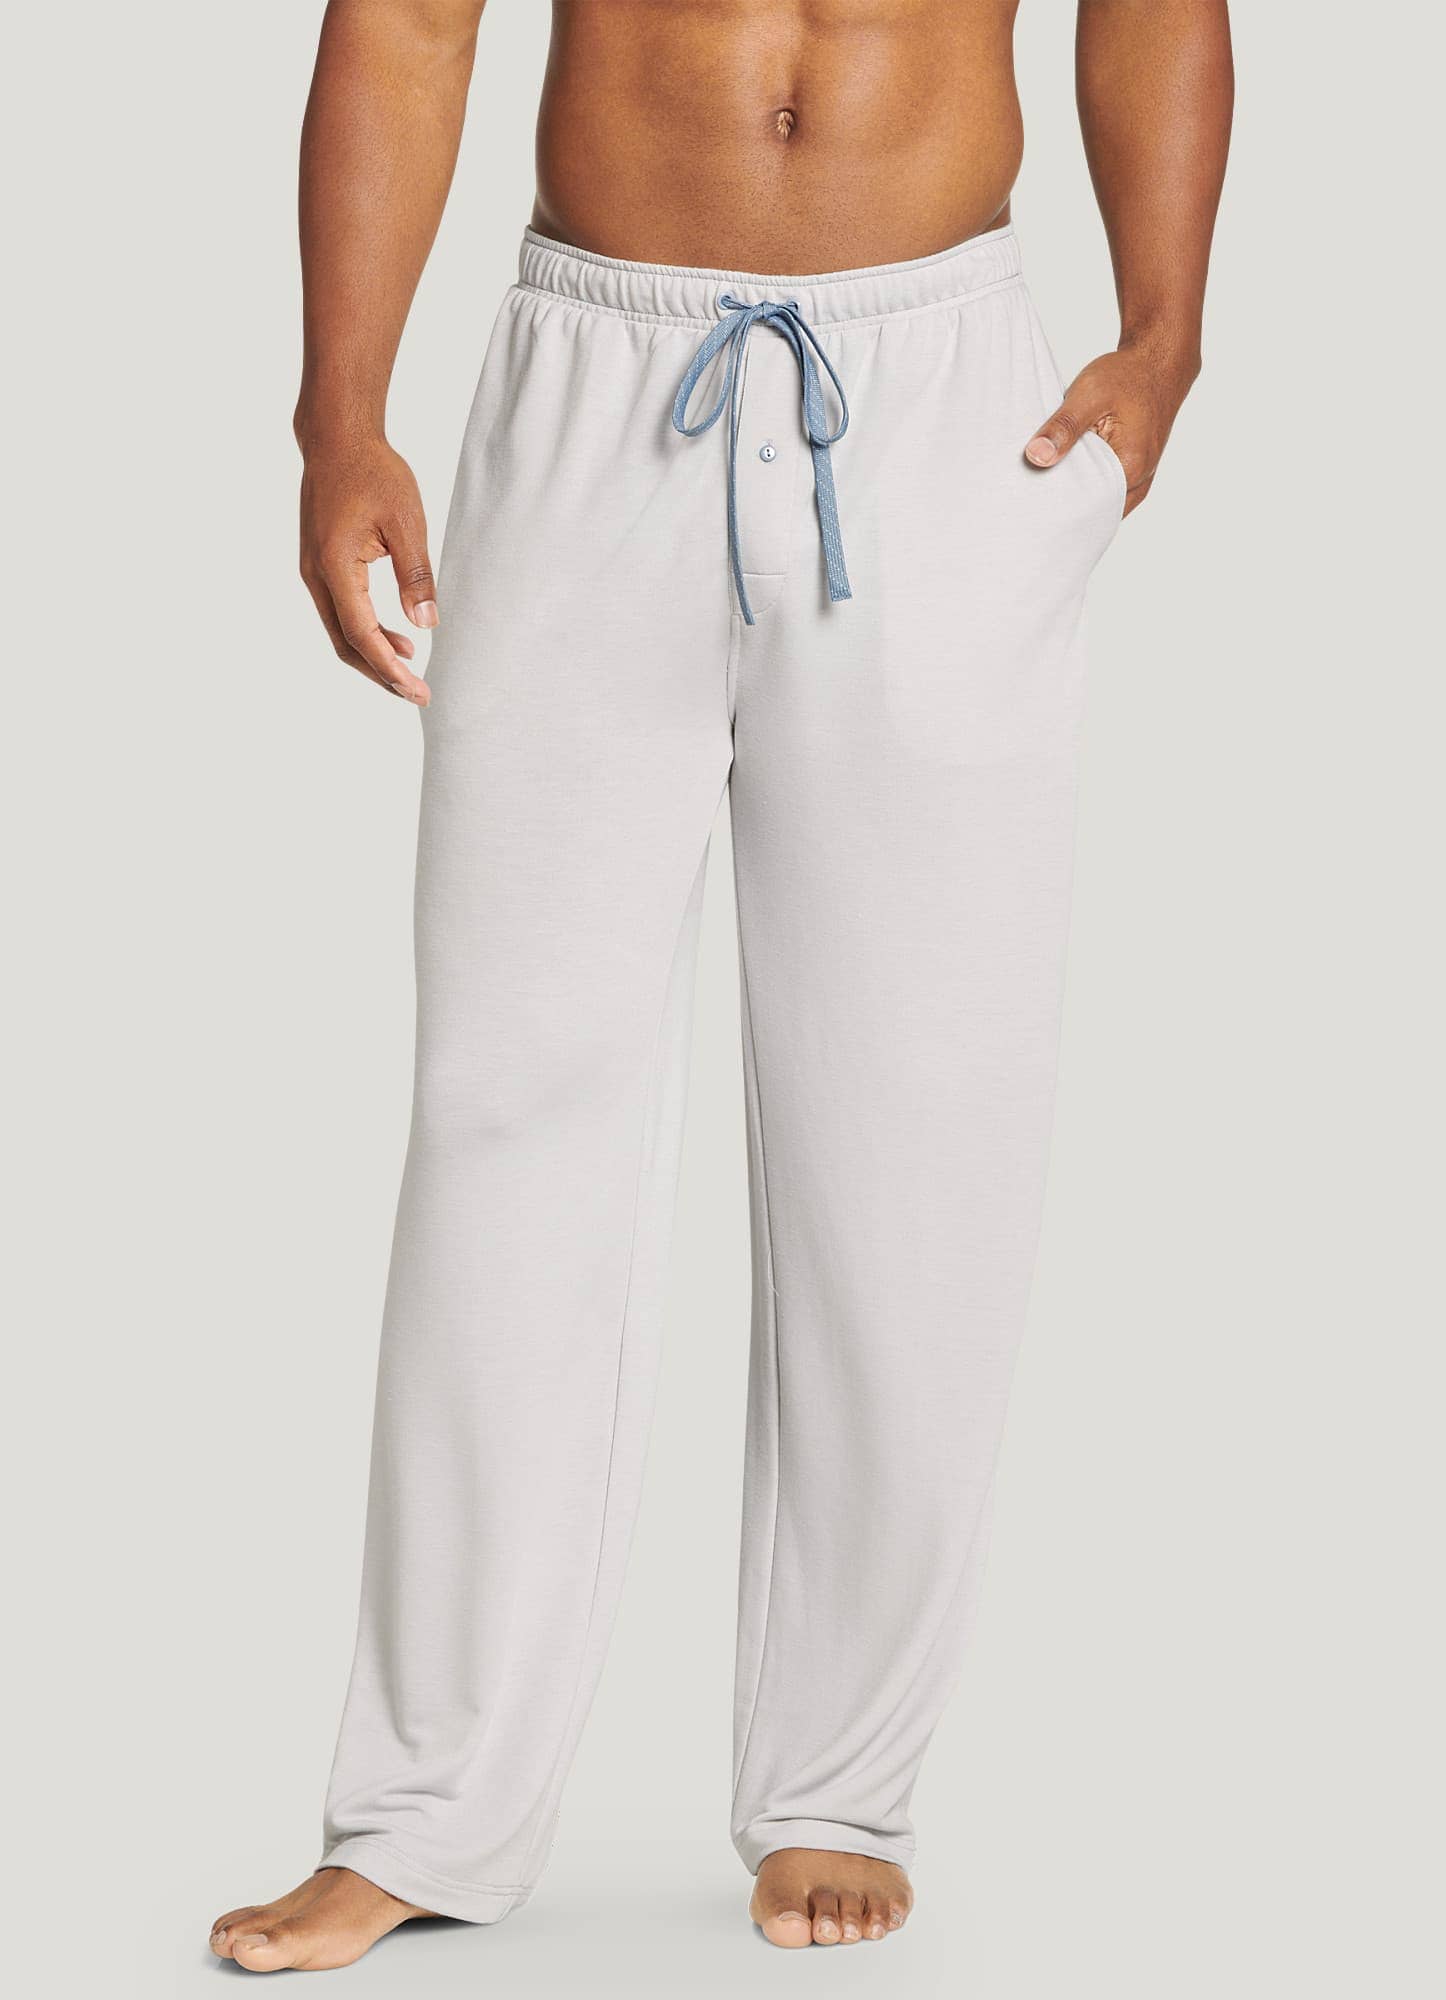 Navy Men's Lounge Pants | L'Homme Invisible Mens Jersey lounge pants in Navy